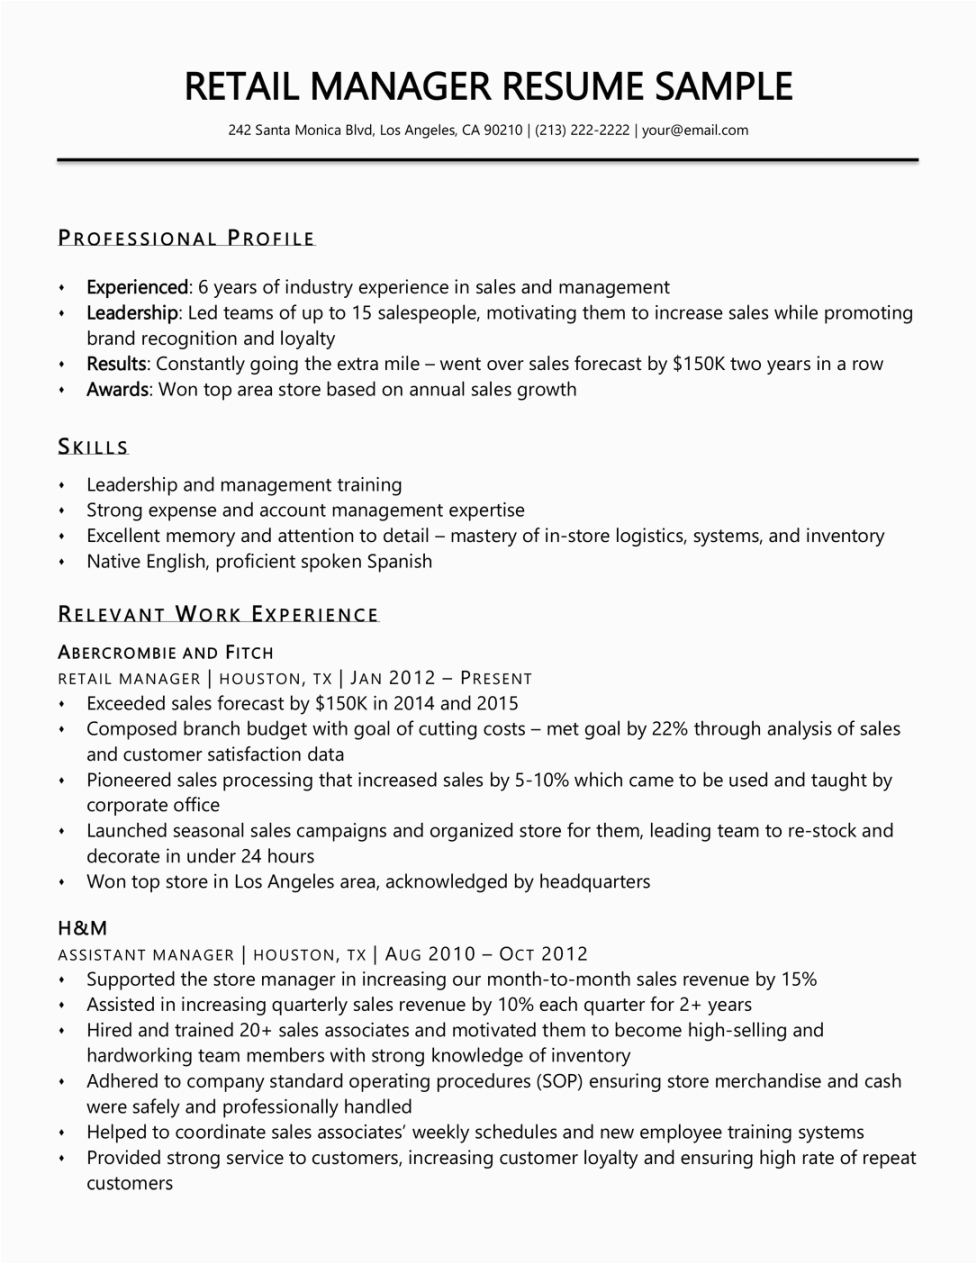 retail management resume template